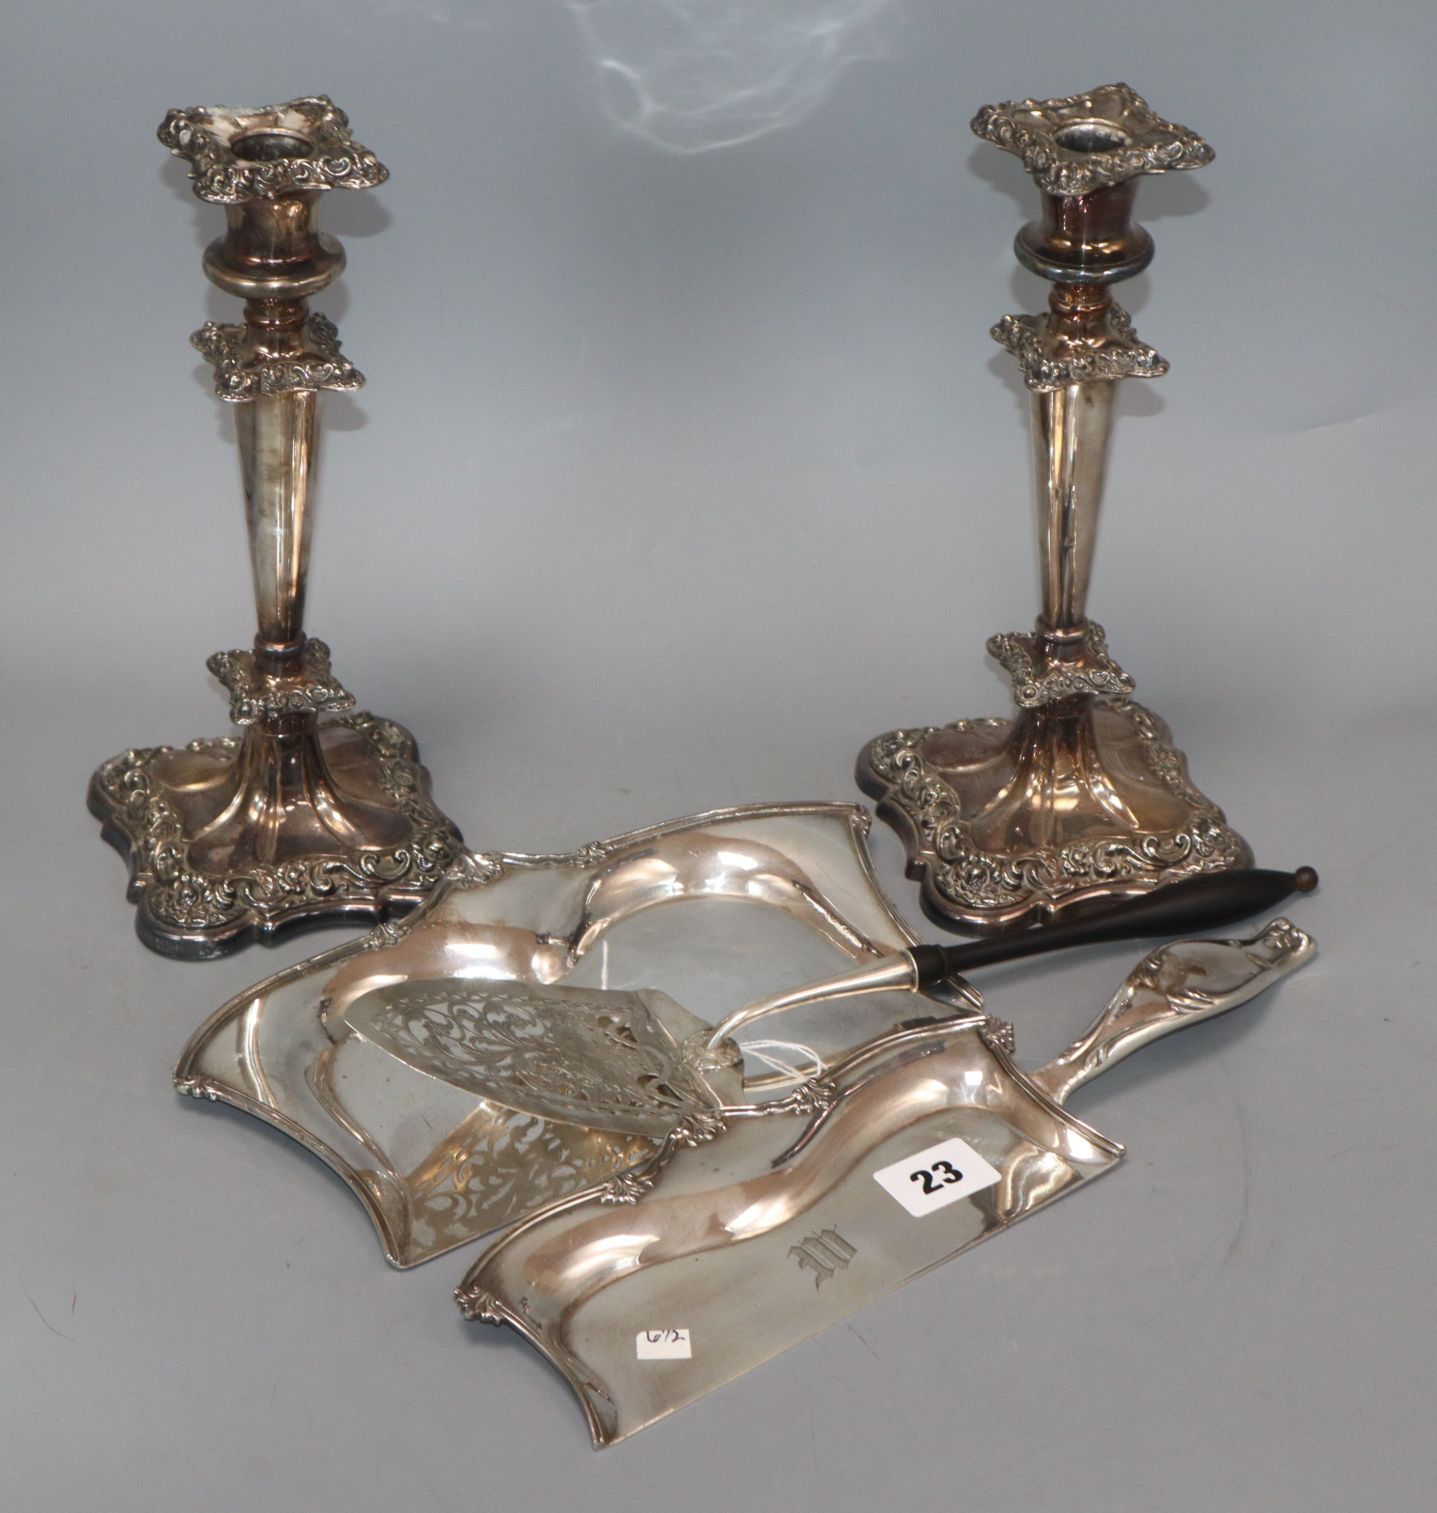 A pair of plated candlesticks, a crumb scoop and a presentation trowel